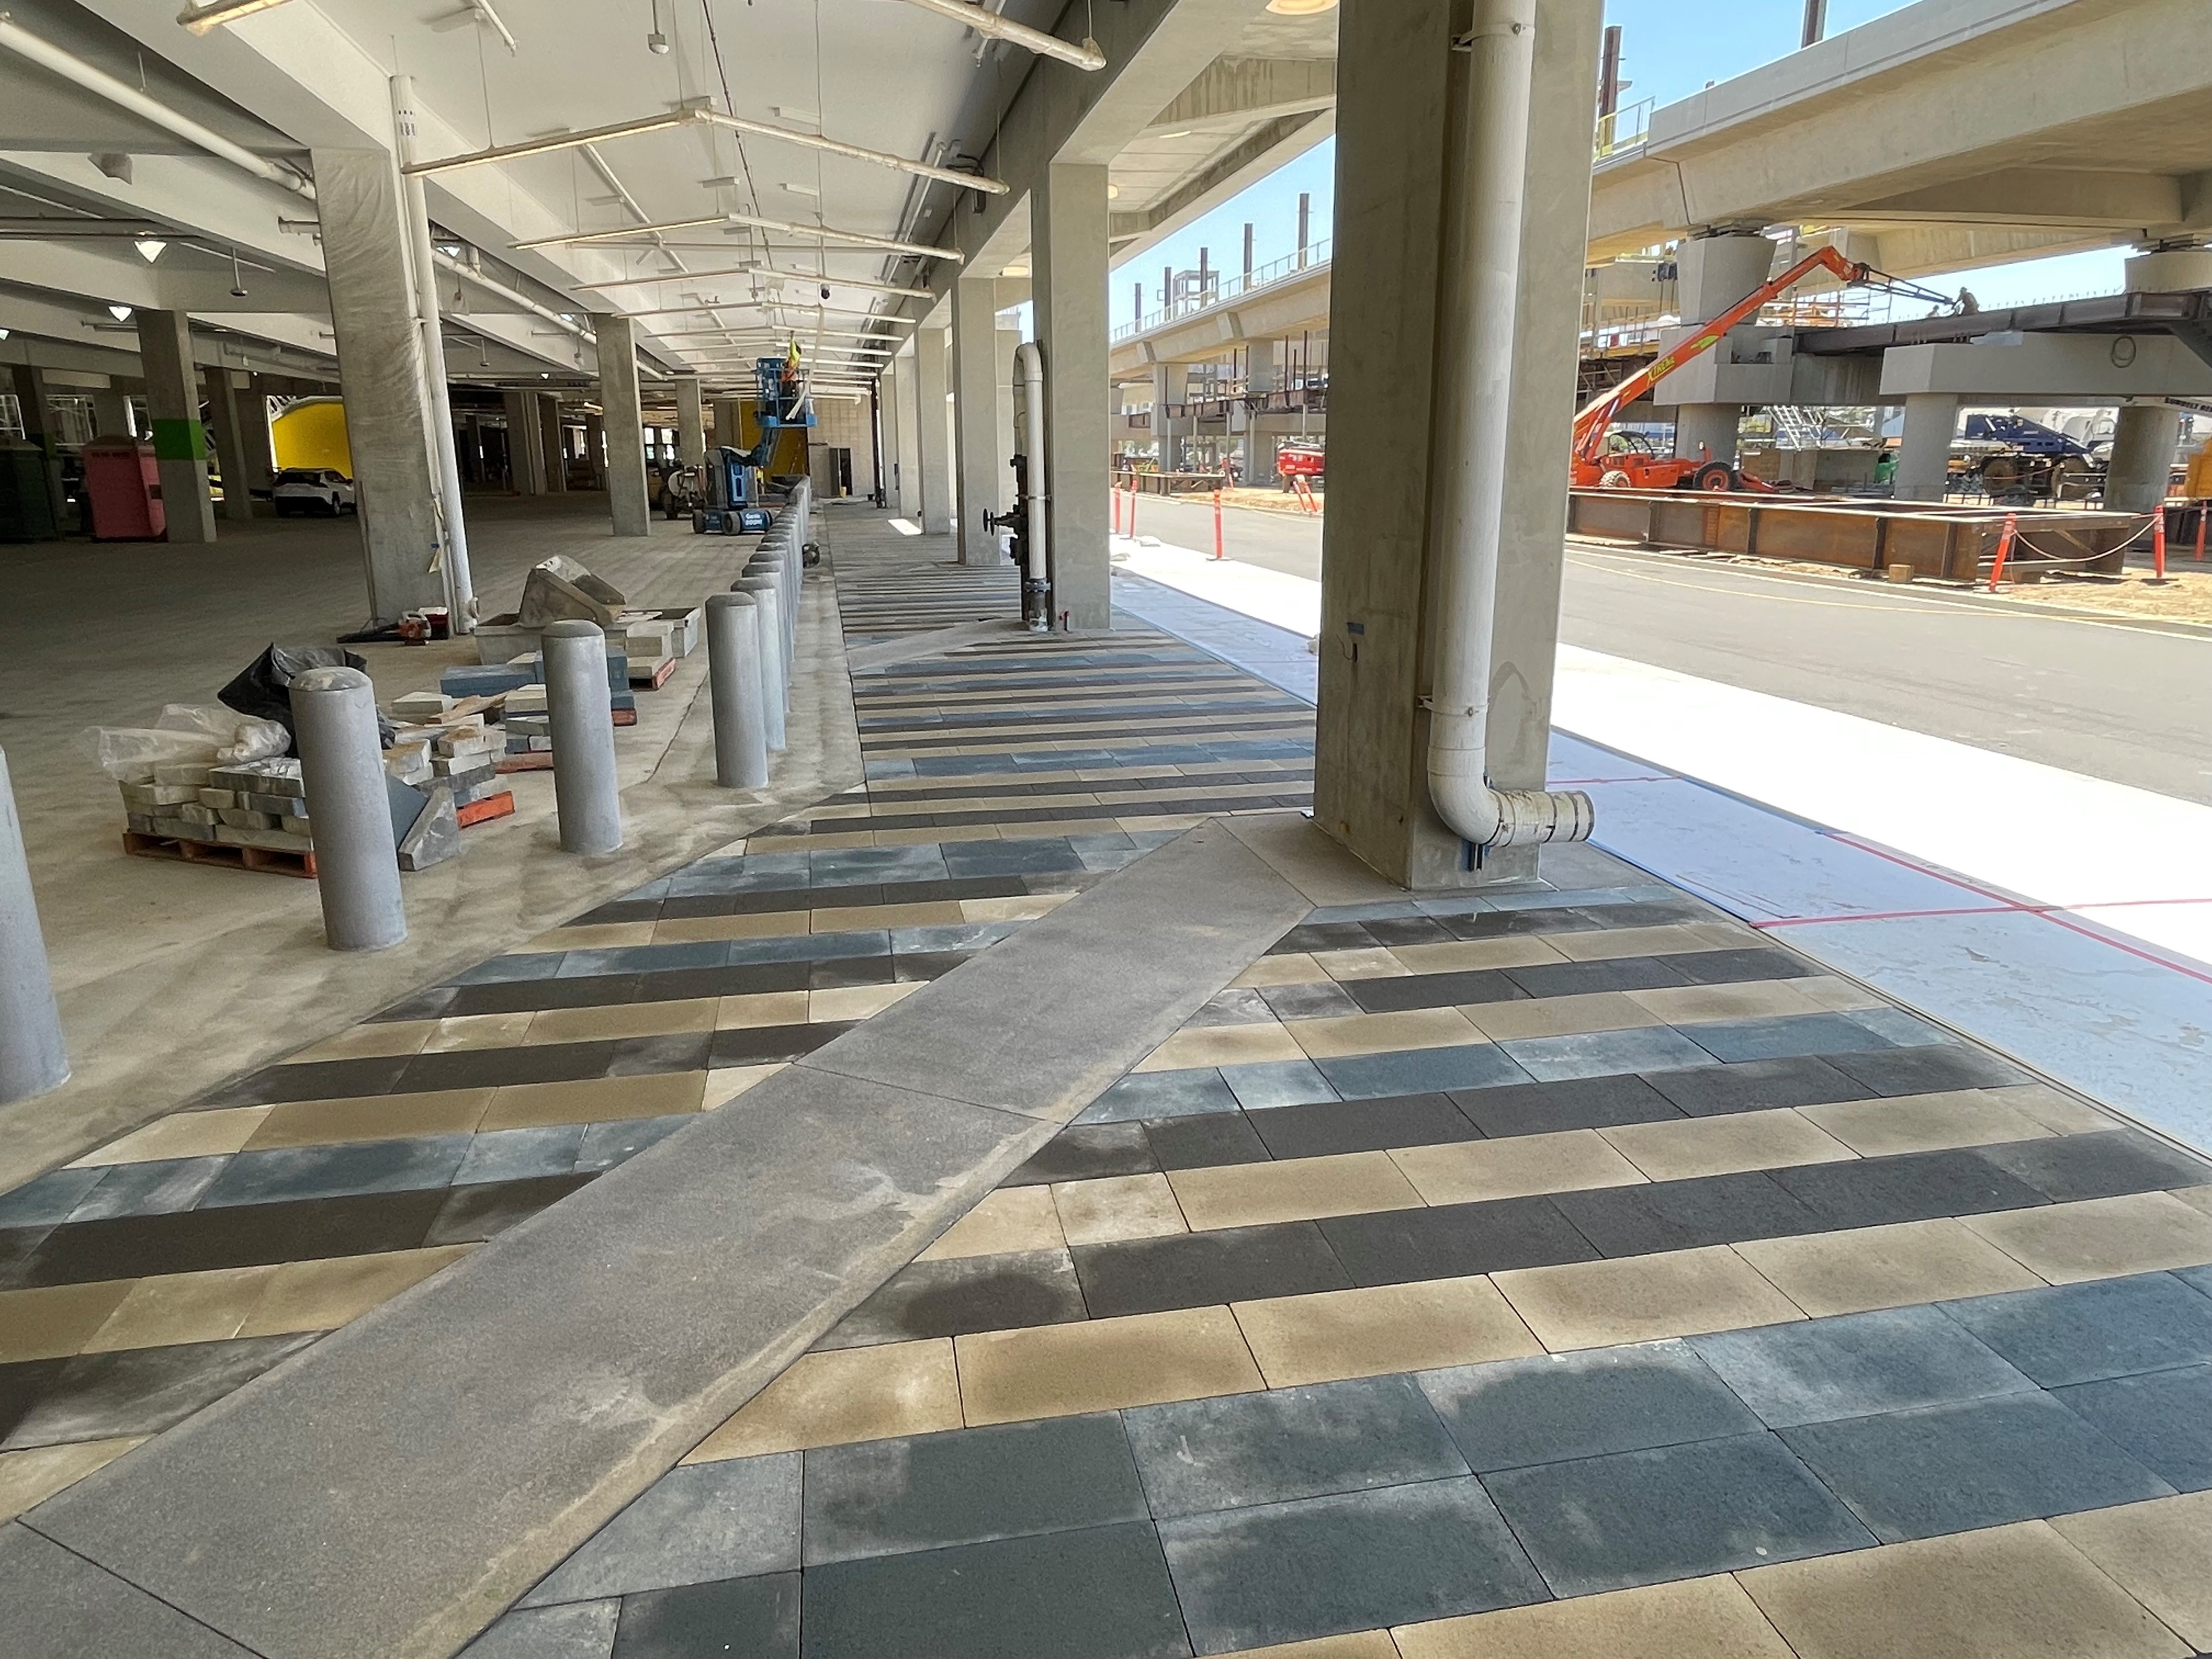 A view of the passenger walkway at the Intermodal Transportation Facility-West.